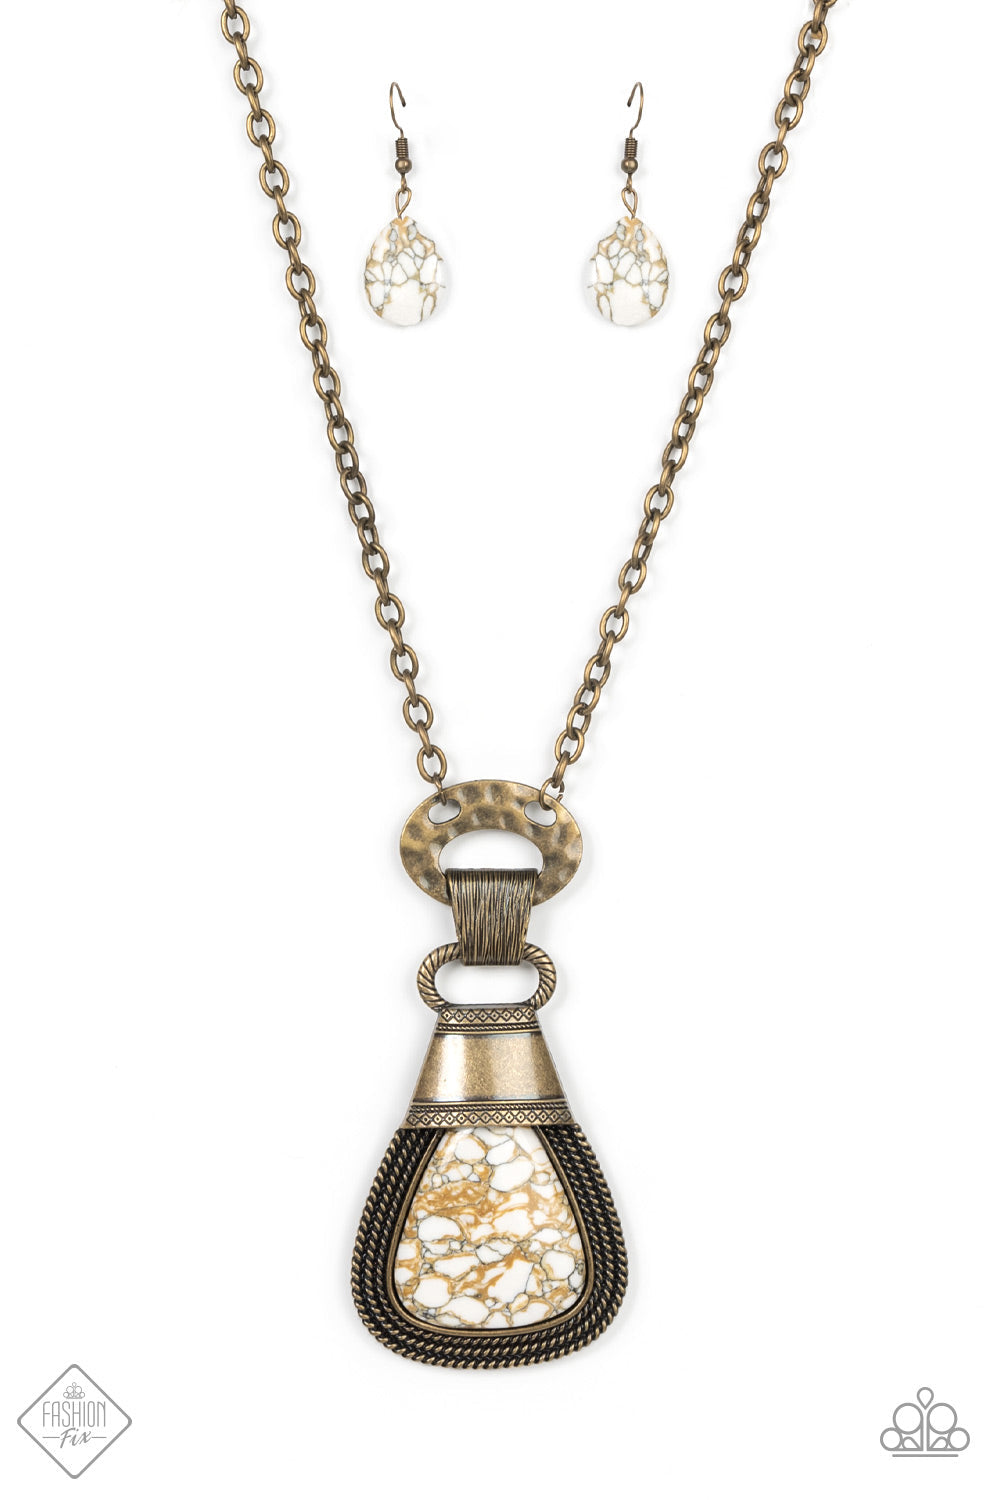 Rodeo Royale - Brass Brown Necklace - Paparazzi Accessories - An earthy brown and white marbled stone is encased in a brass frame made up of layers of rope-like texture and topped with an antiqued brass adornment stamped in rustic patterns. The robust pendant swings from a hammered brass ring and clasp at the bottom of a lengthened brass chain, resulting in a captivating finish necklace.